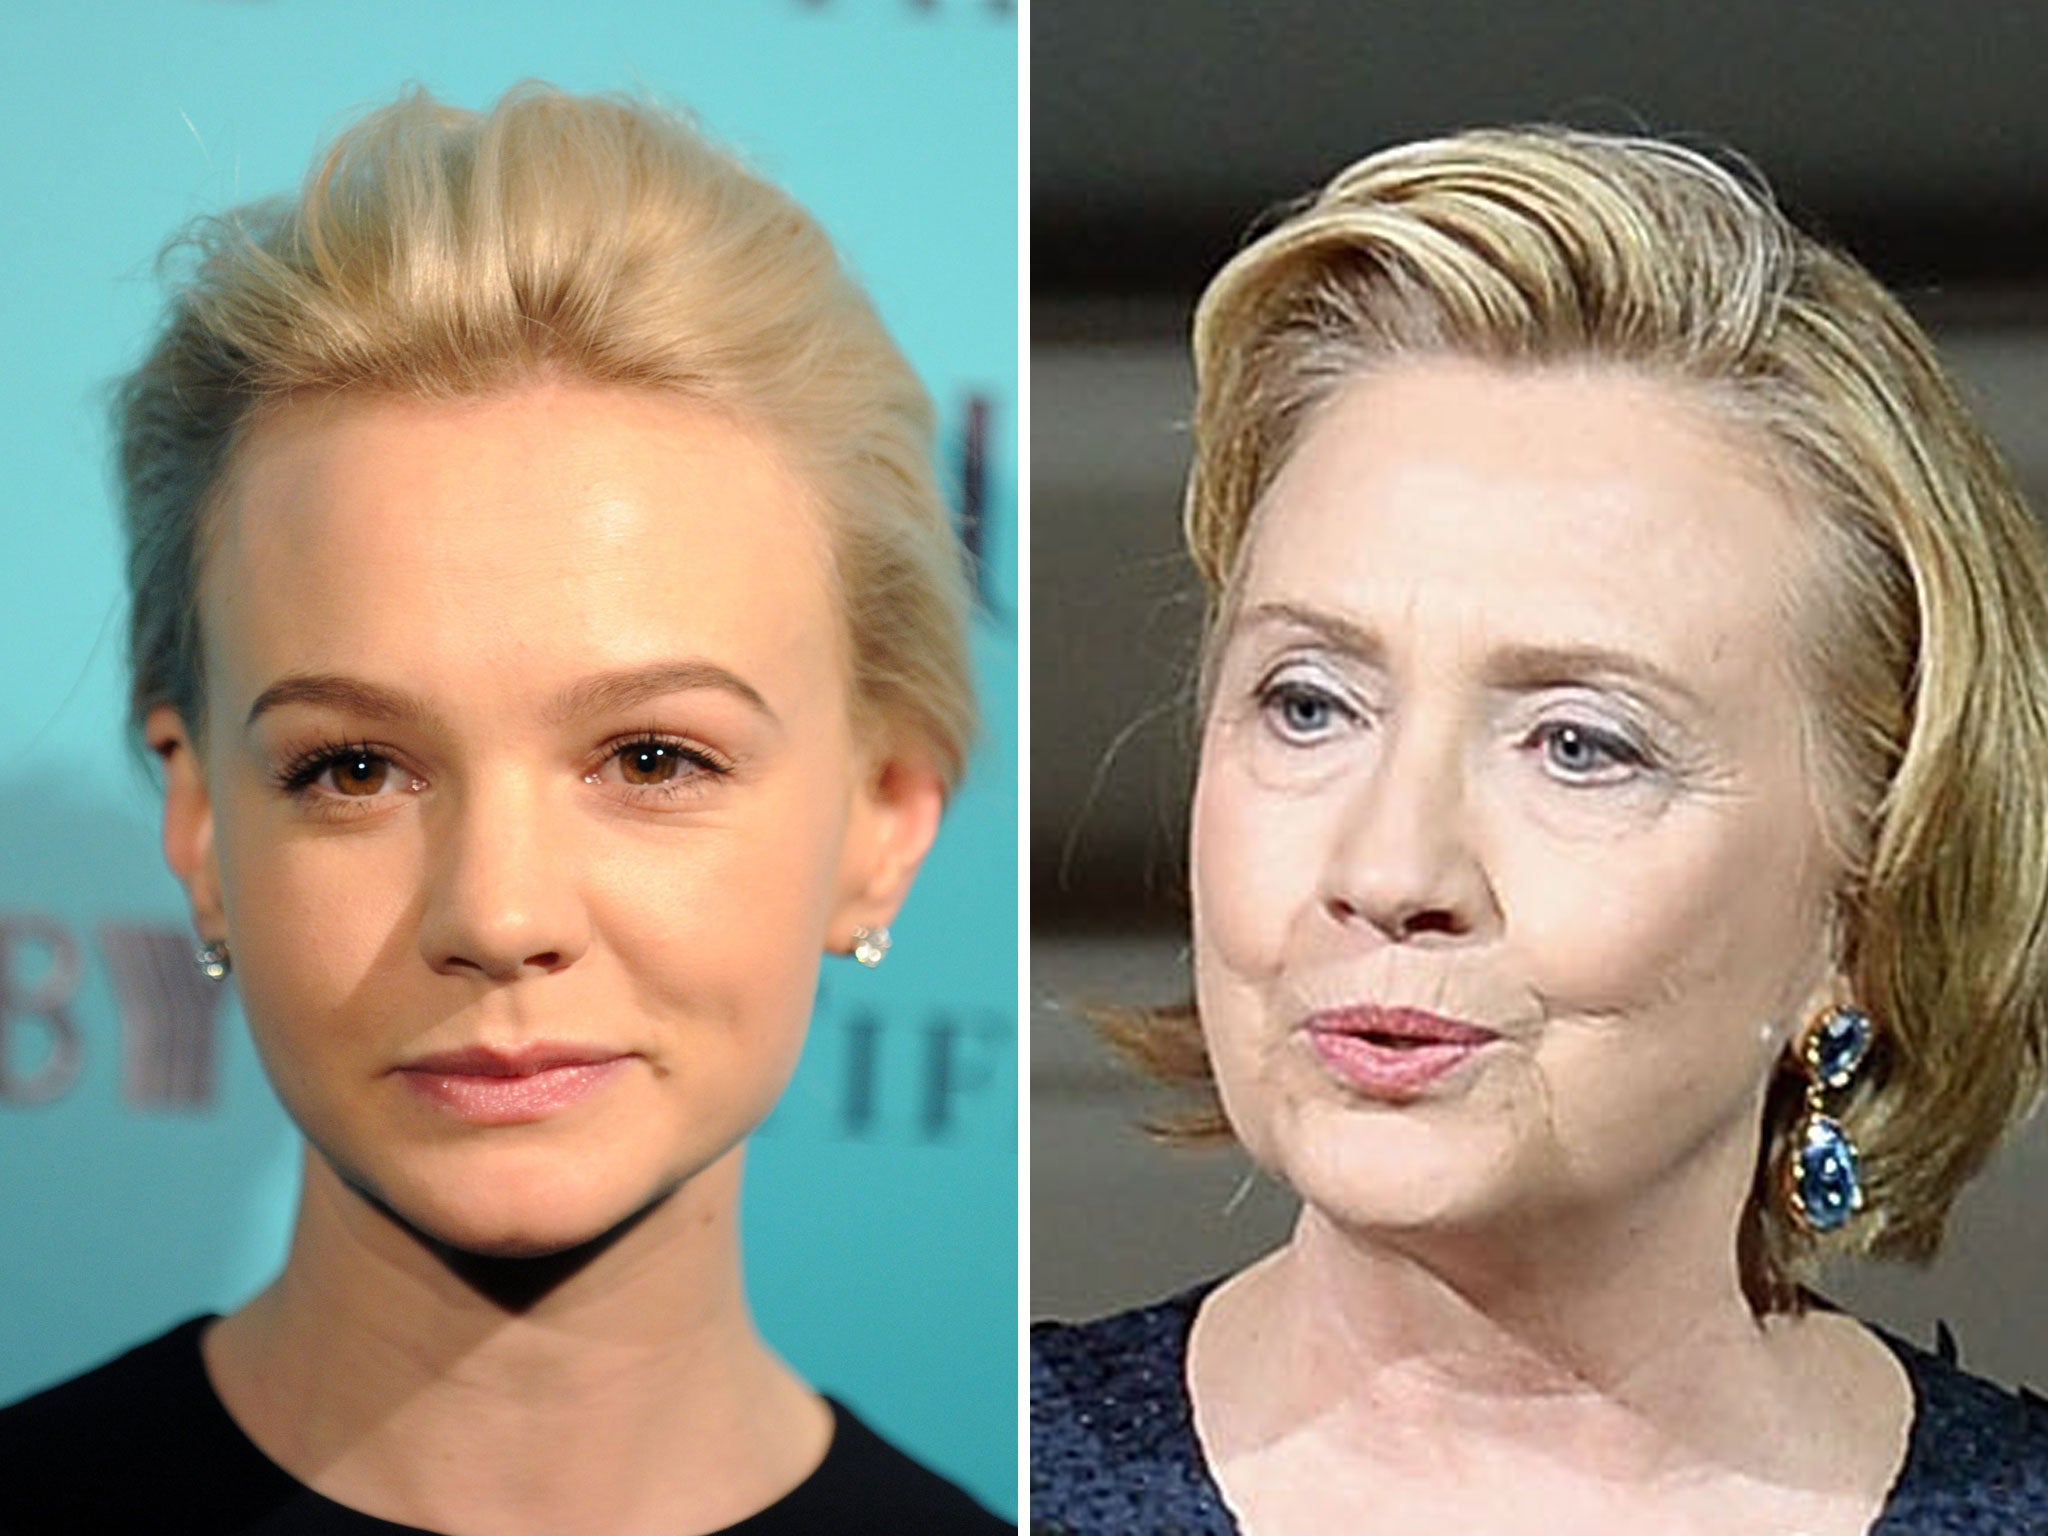 Carey Mulligan is set to beat a string of American rivals to play the role of Hillary Clinton in a biopic